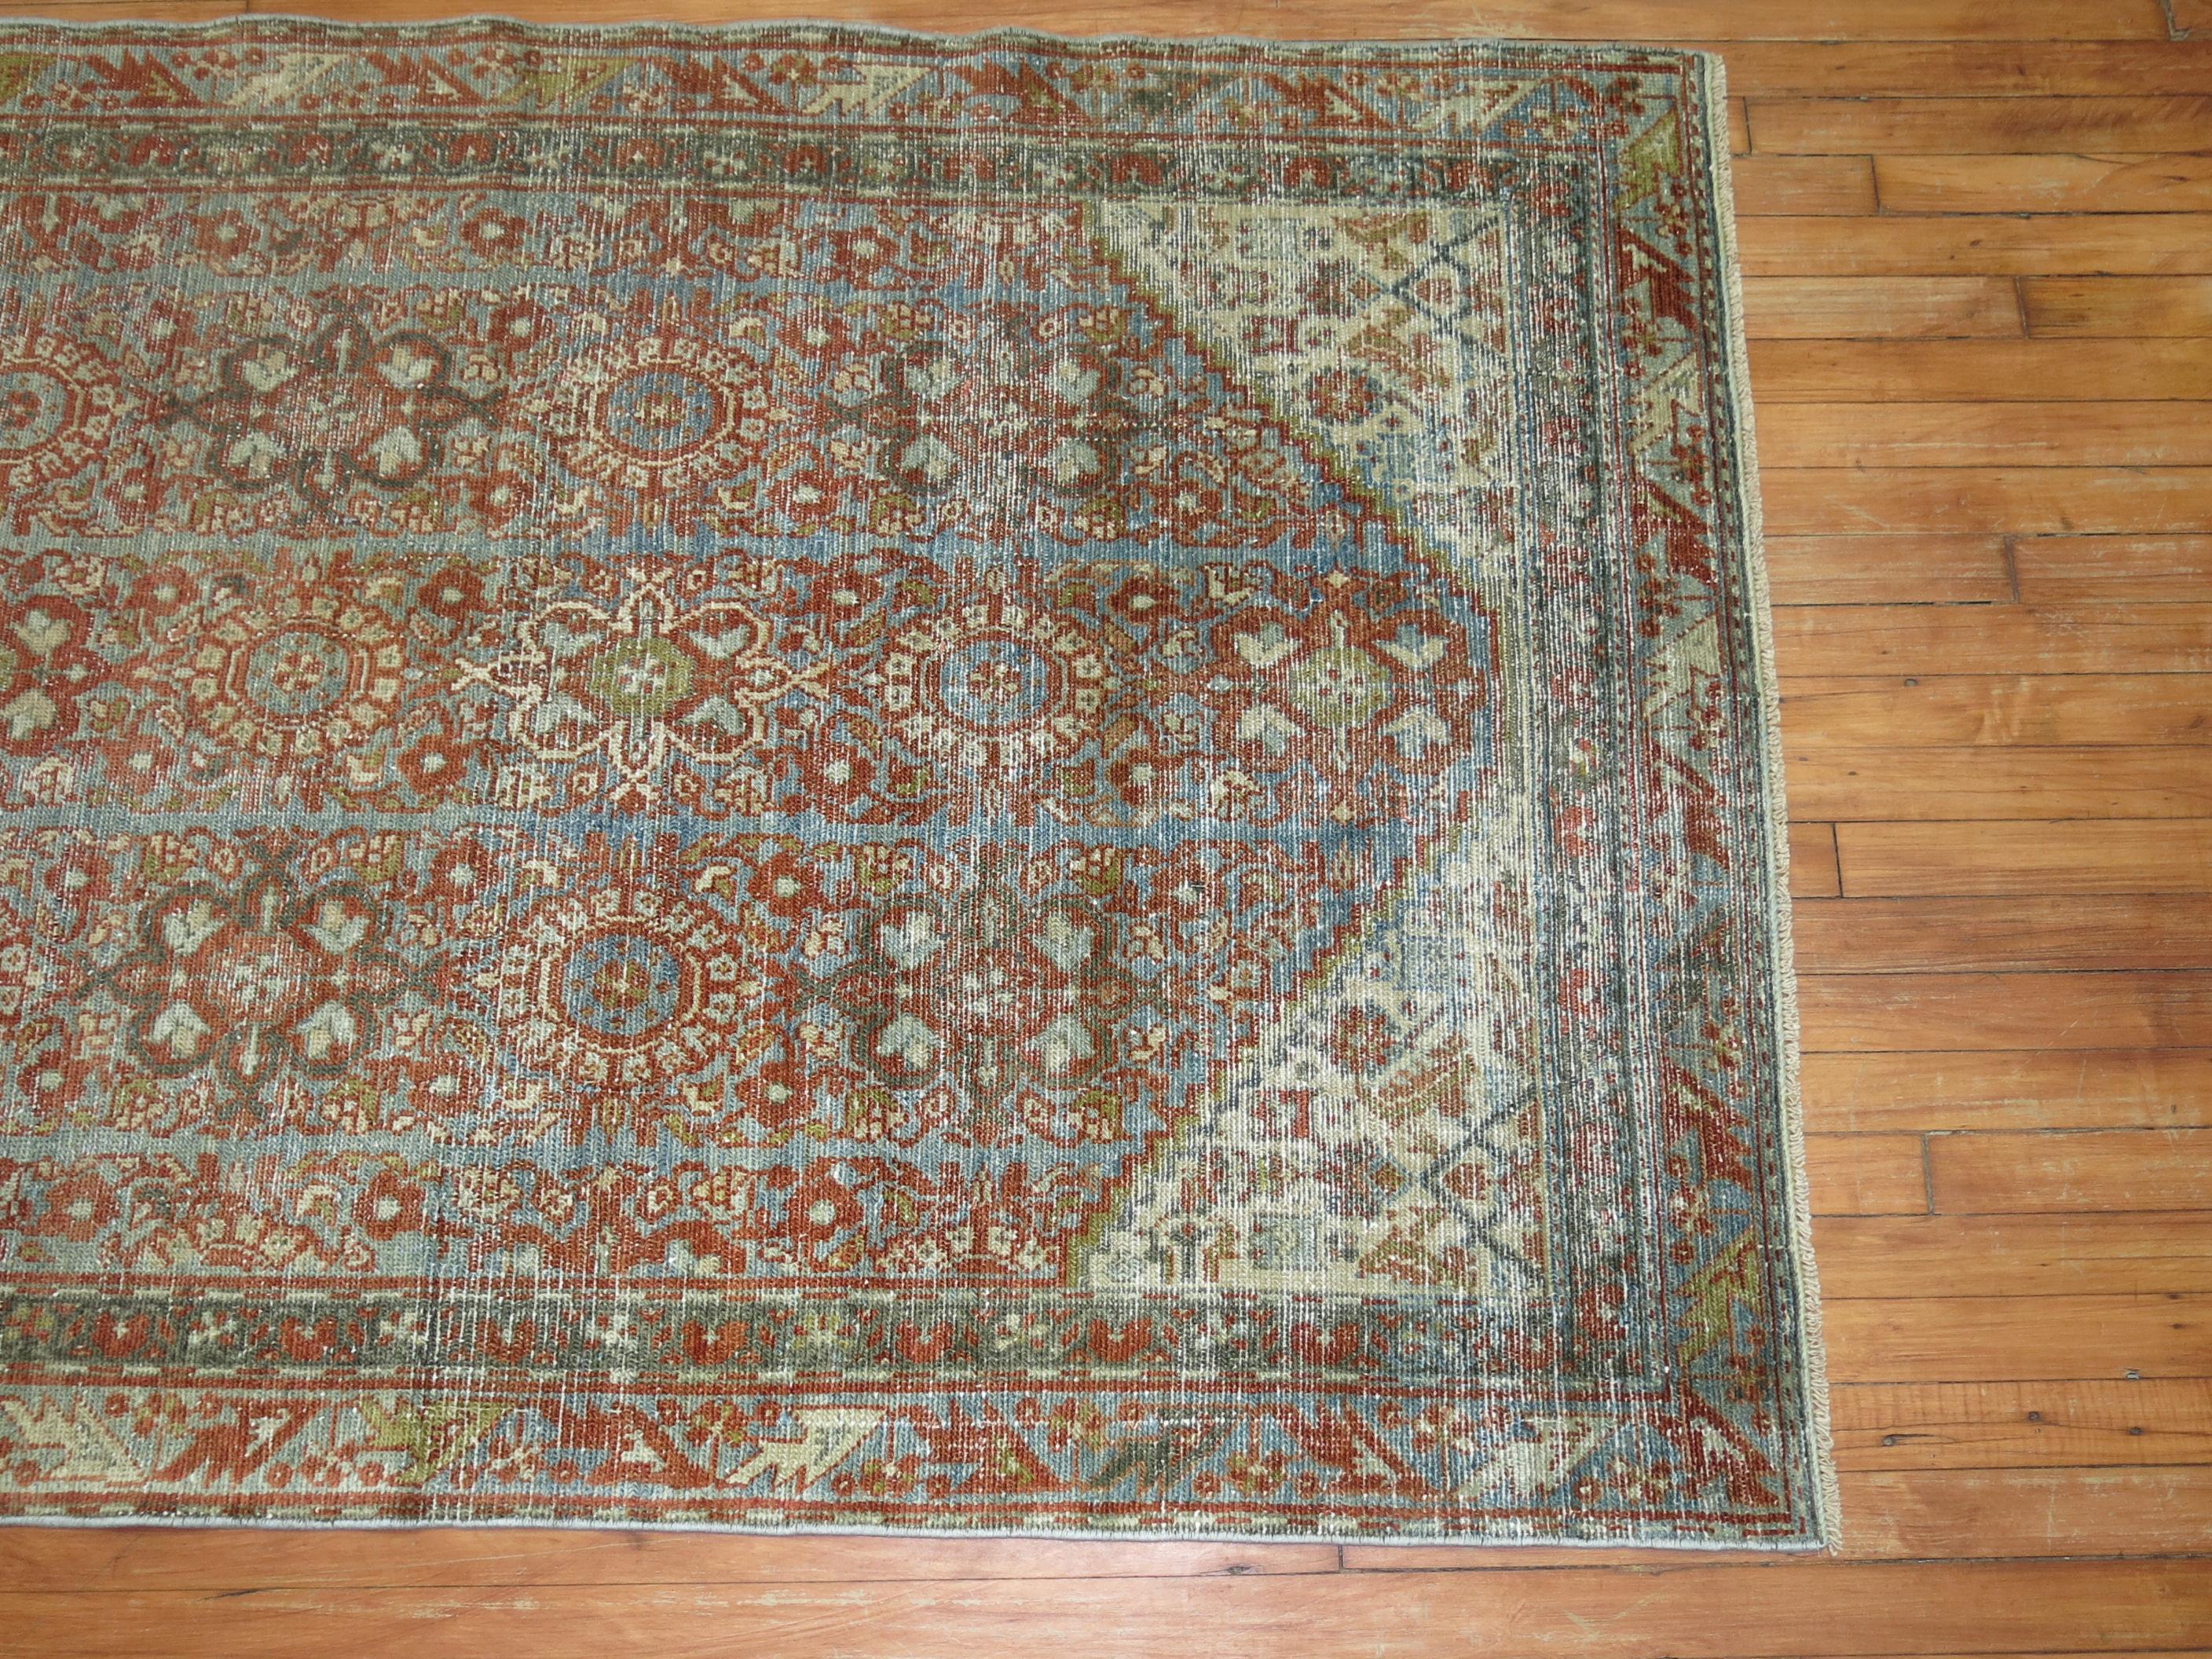 Persian Mahal rug 

Mahal Persian carpets from the 19th century and turn of the 20th century have become one of the most desirable among Persian village weavings, as they appeal strongly to both connoisseurs and interior designers.